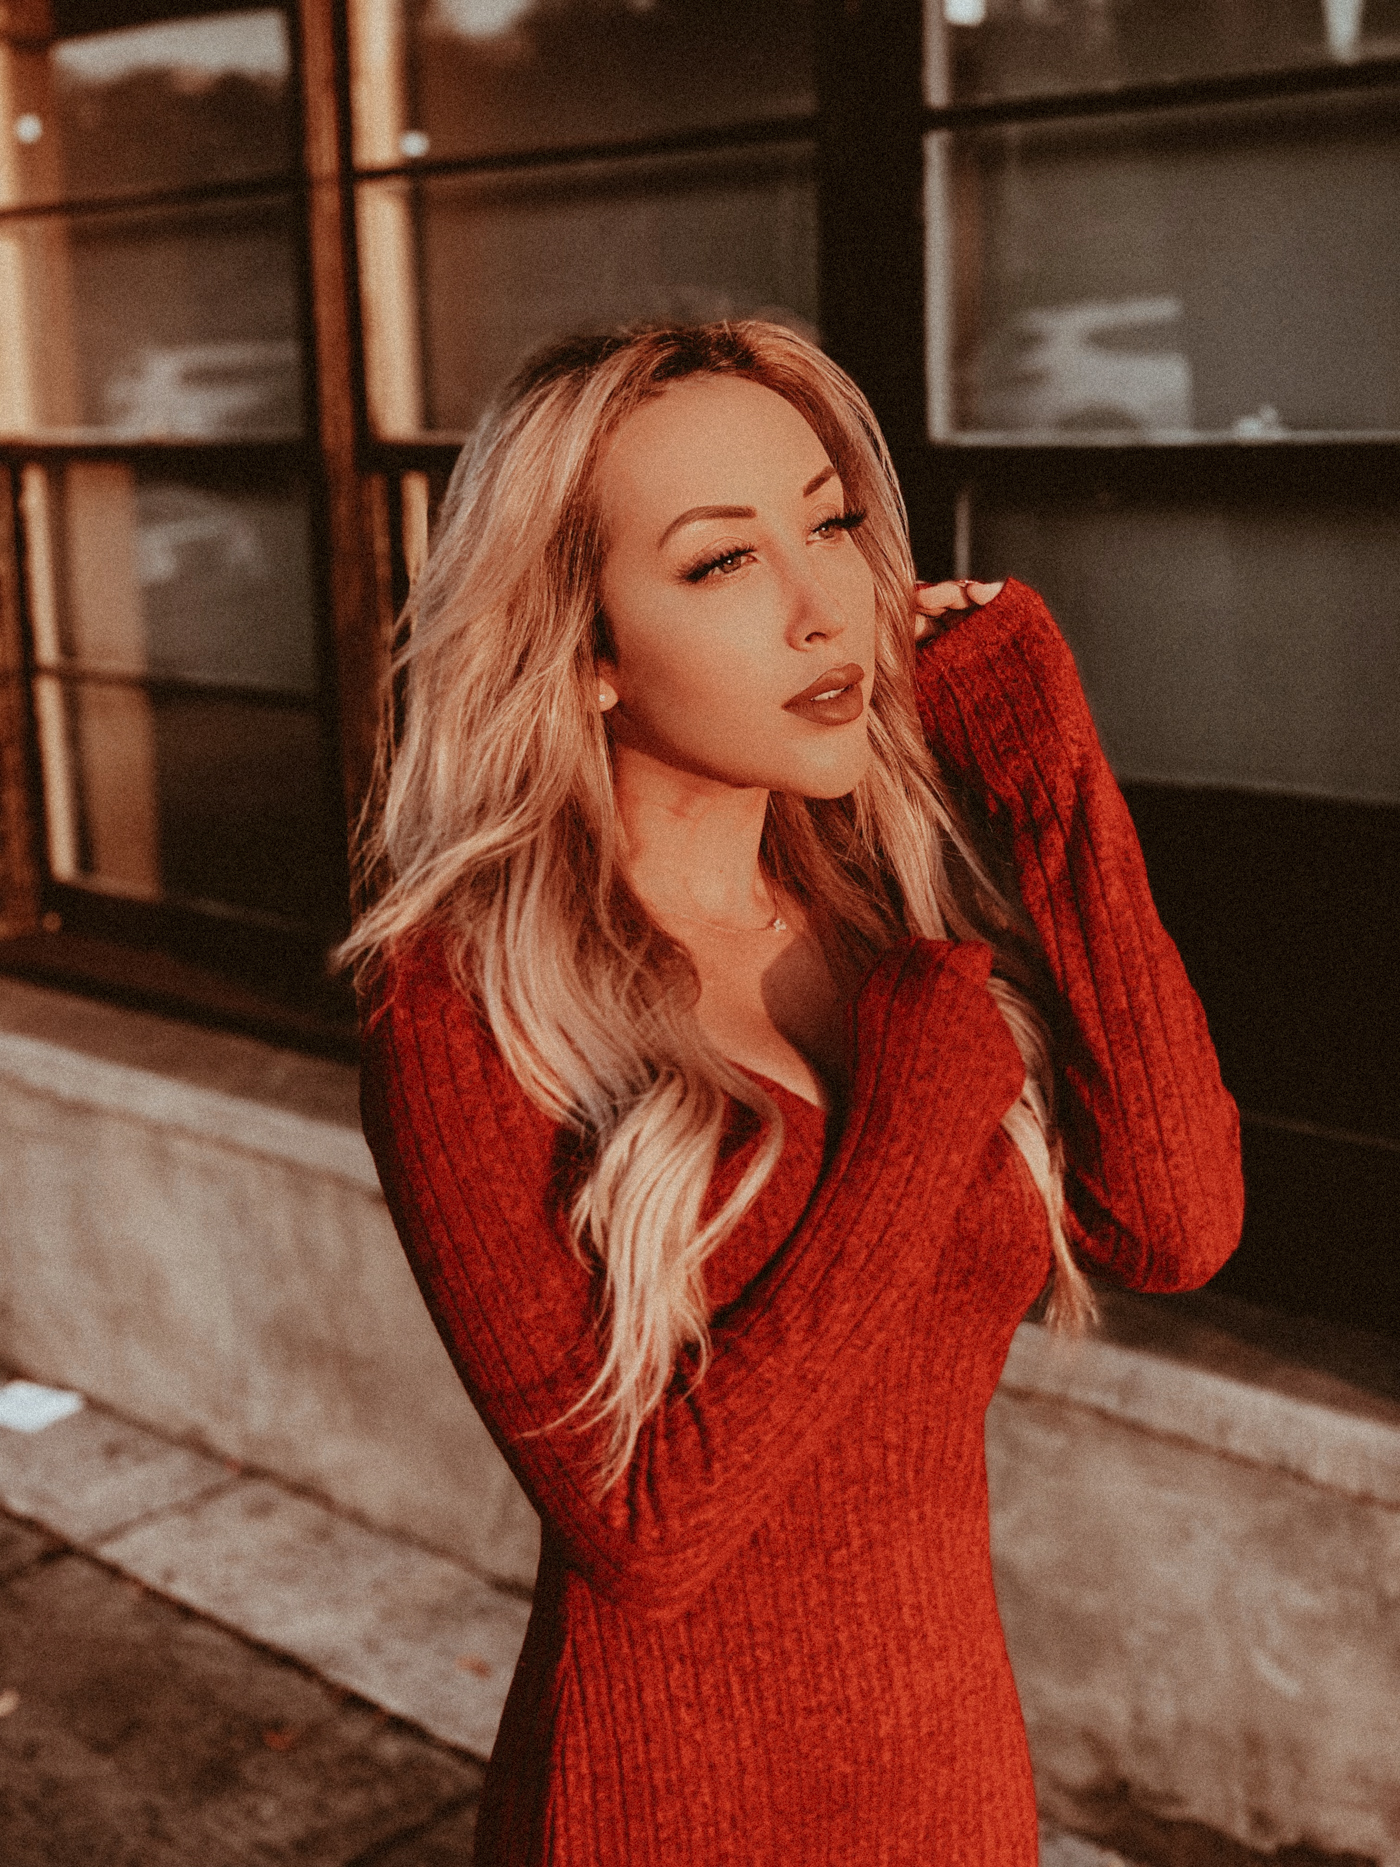 Golden Hour | Shooting at Golden Hour | Sunset | Red Sweater Dress | Blondie in the City by Hayley Larue